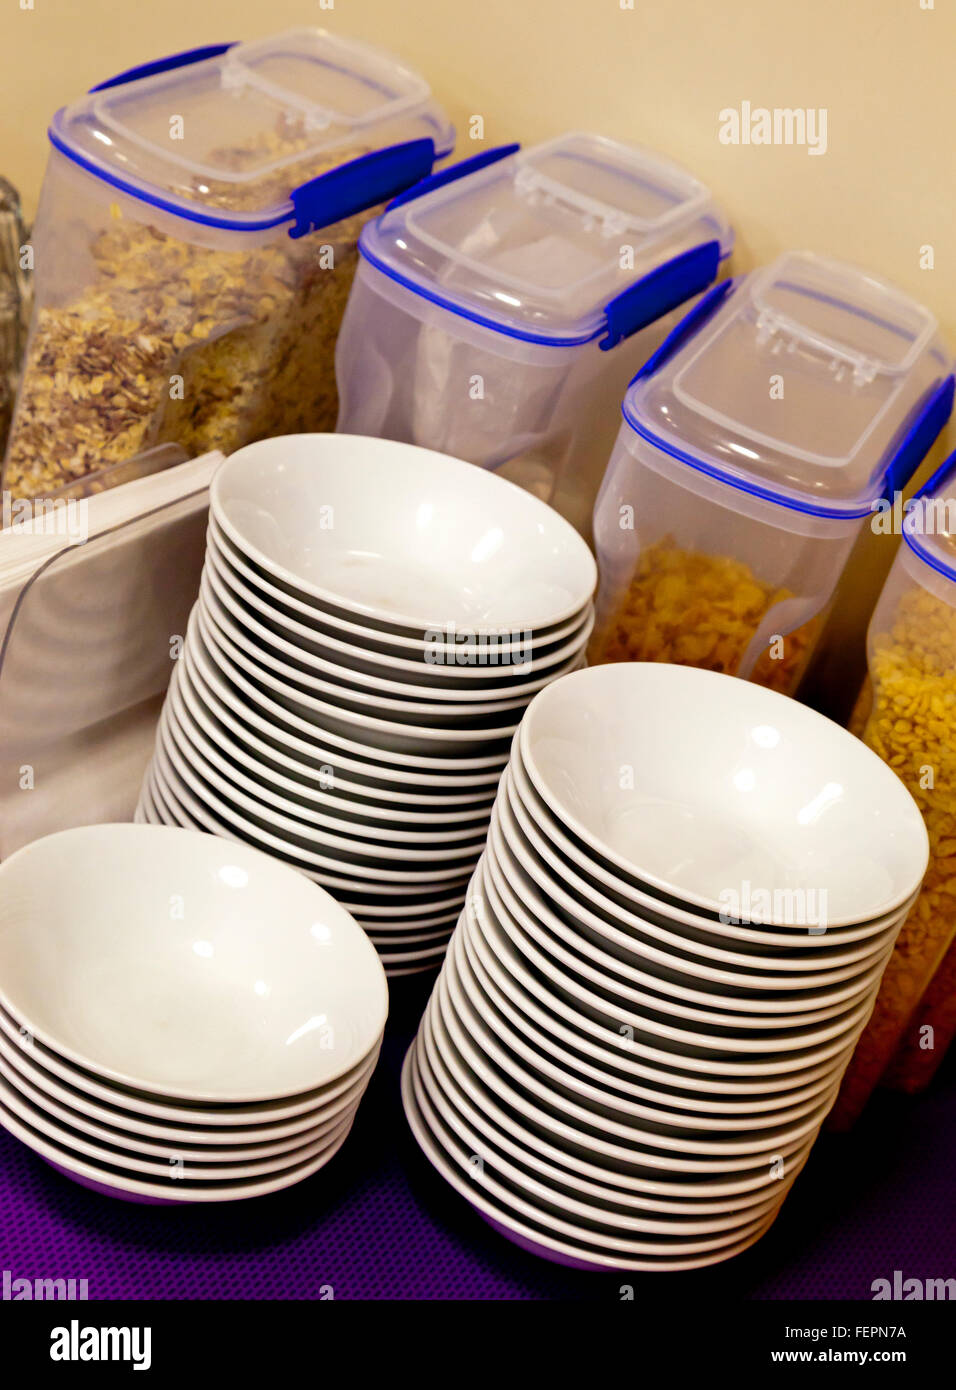 Breakfast cereals in plastic containers and white china bowls stacked up in a communal eating area Stock Photo